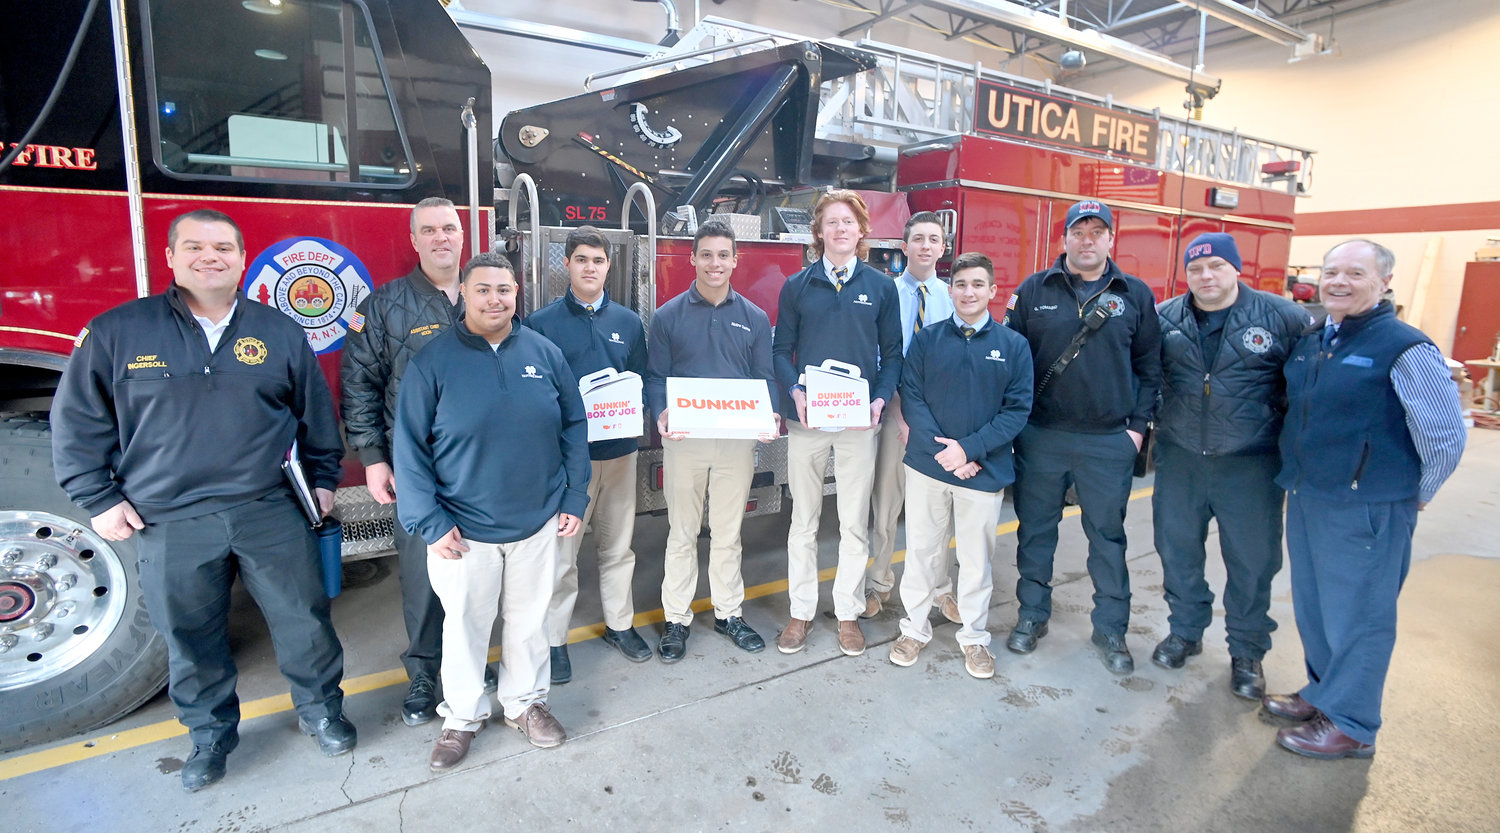 Doughnuts were donated to the Utica Fire Department Wednesday, Feb. 1 by Notre Dame Junior/Senior High School students. From left are Utica Chief Scott Ingersoll, Assistant Chief James Noon, students Marquis Reeves, Sean Noon, Isaiah Sexton, Jake Engelhart, Tim Carville and Louis Robertelli, Utica Firefighter Garrett Tomanio, Lt. Joe Topa and Notre Dame Campus Minister Bob McQueen.